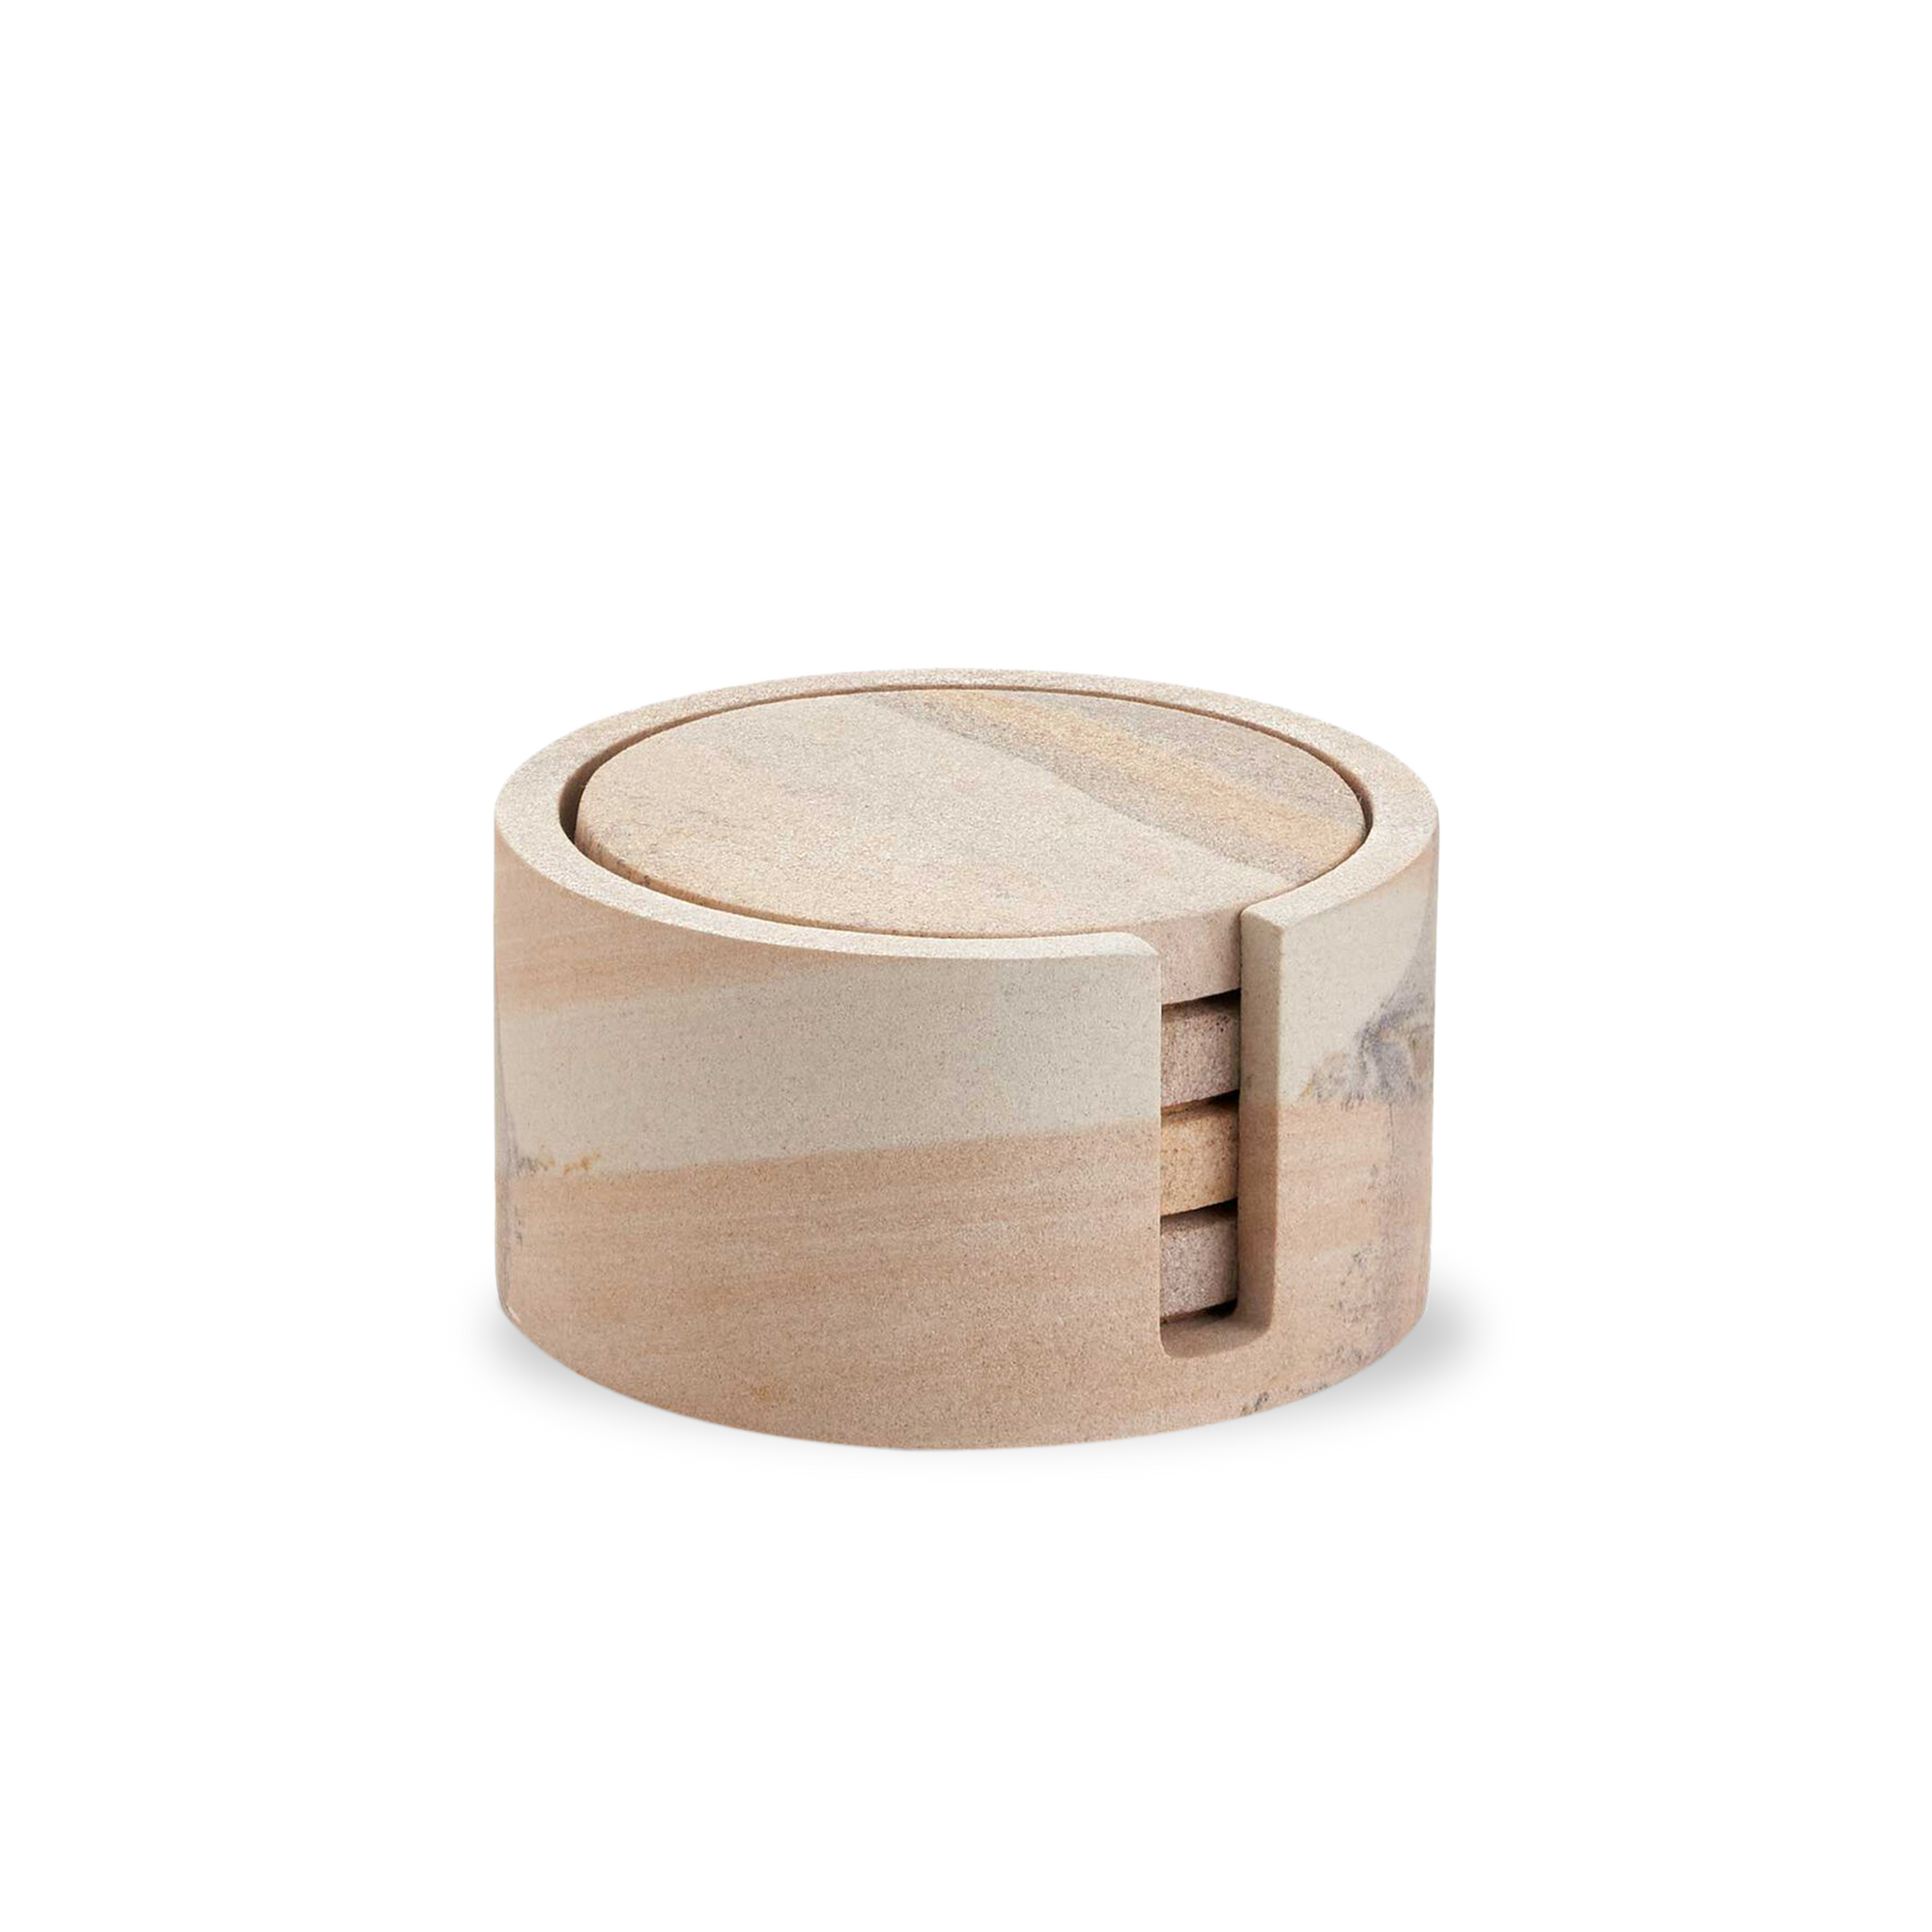 Made with Sandstone and a natural cork bottom to protect from surface abrasions, these coasters are elegantly paired with a round vessel for elegant storage.